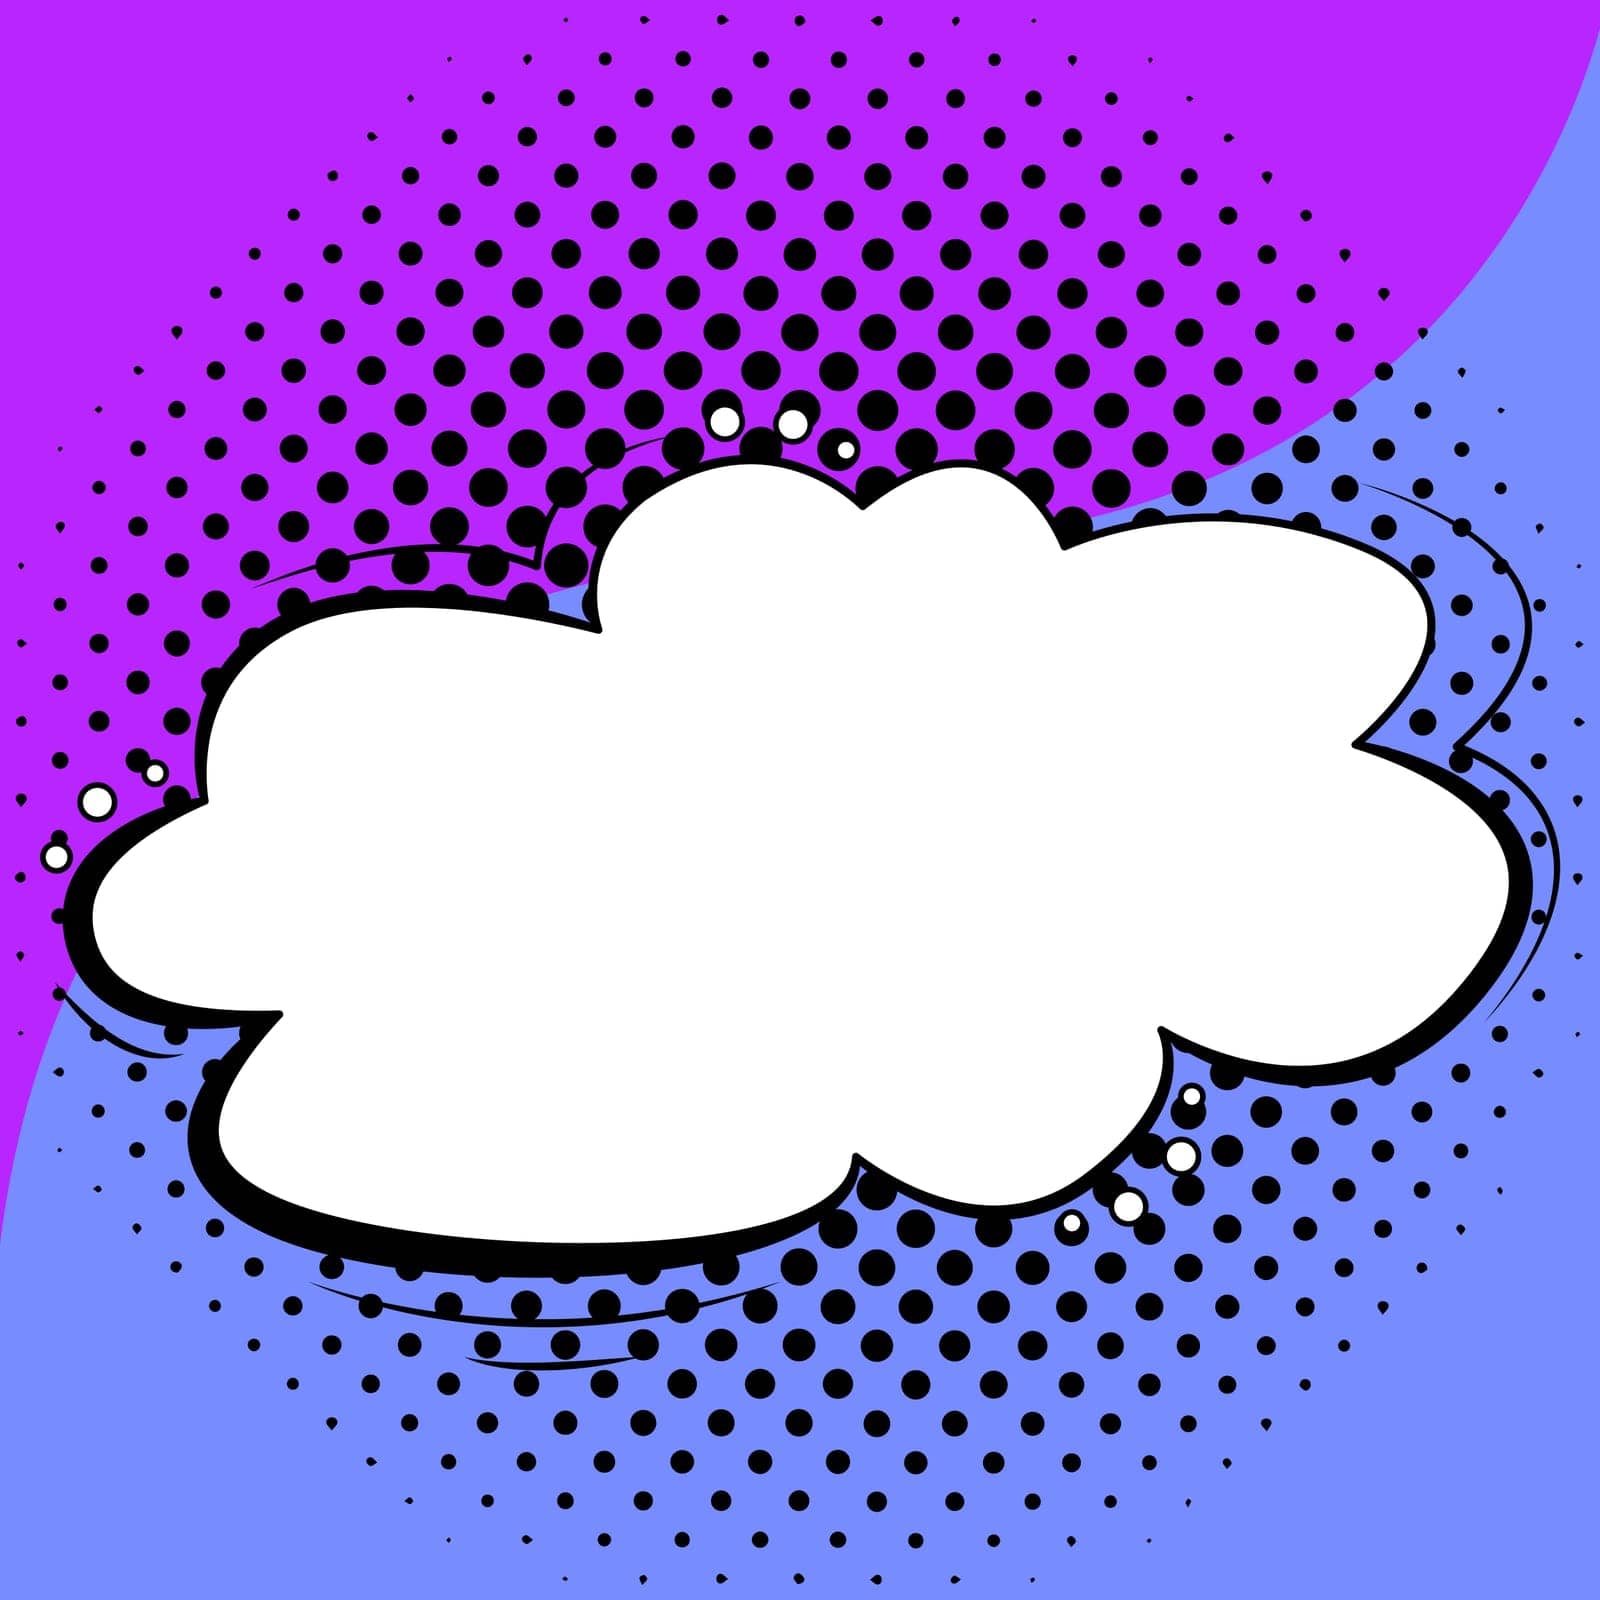 Blank Speech Bubble With Copy Space Over Color Background Design.